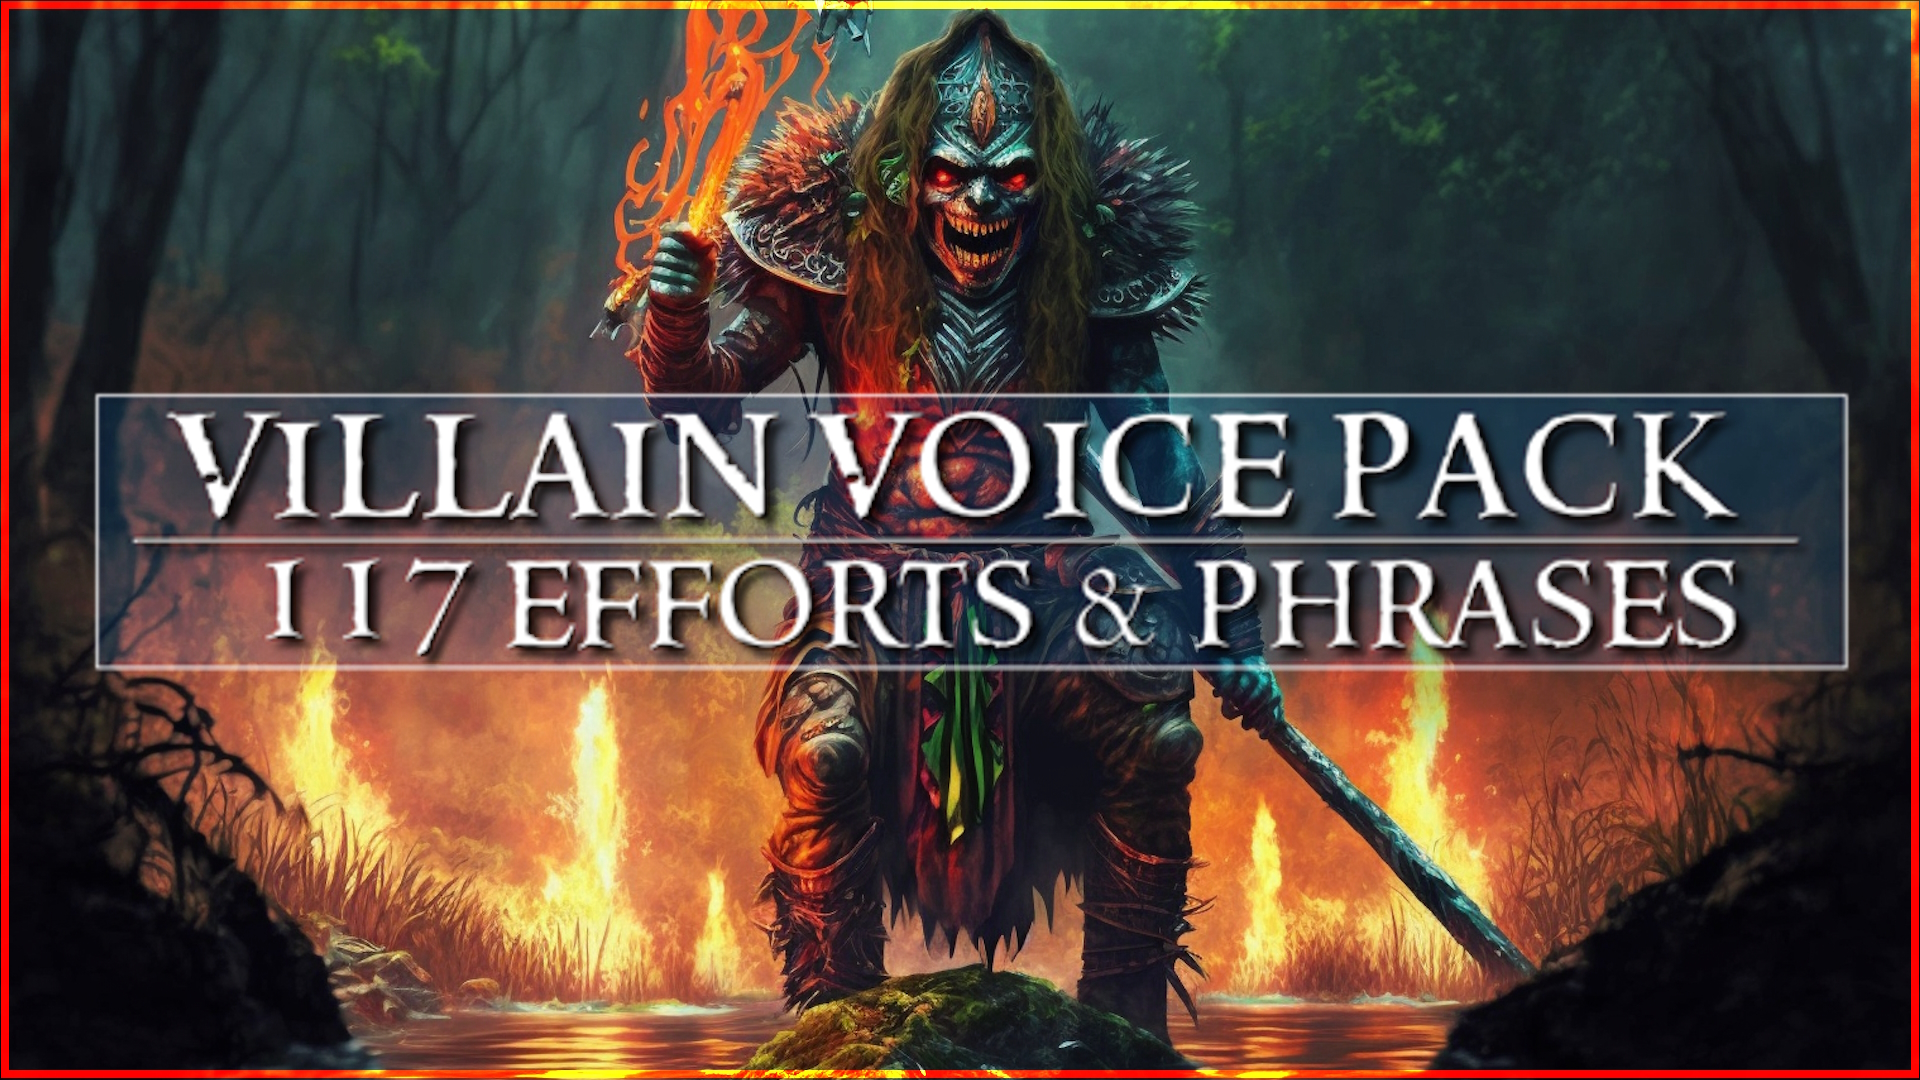 Evil Villain Voice Pack Of 117 Efforts and Phrases